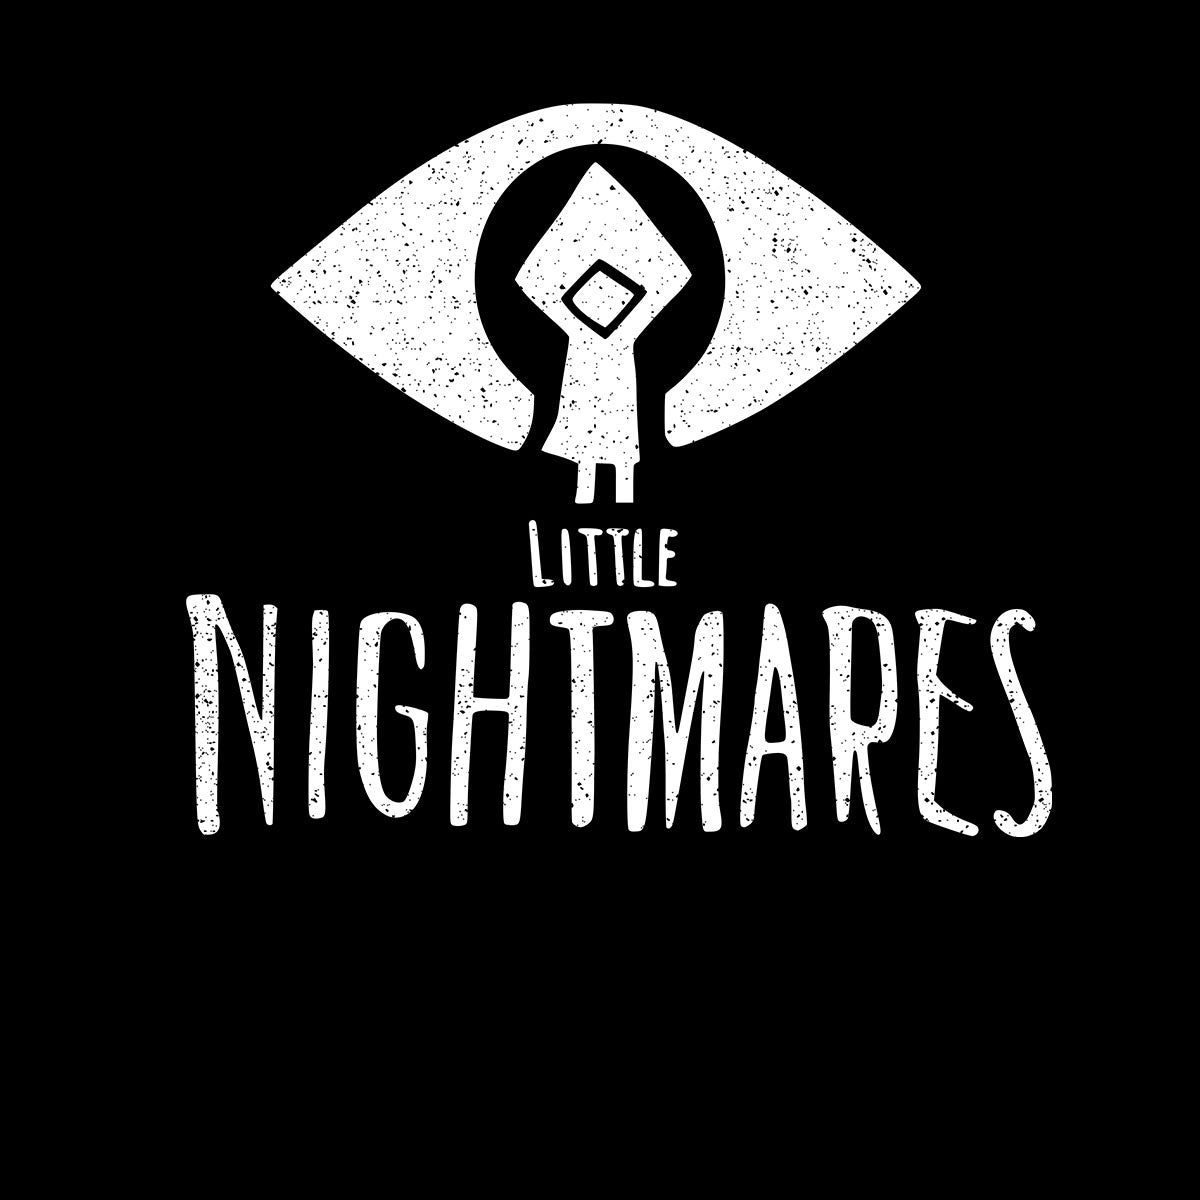 Little Nightmares Cool Creepy Inspired Video Game Typography T-shirt for Kids - Kuzi Tees